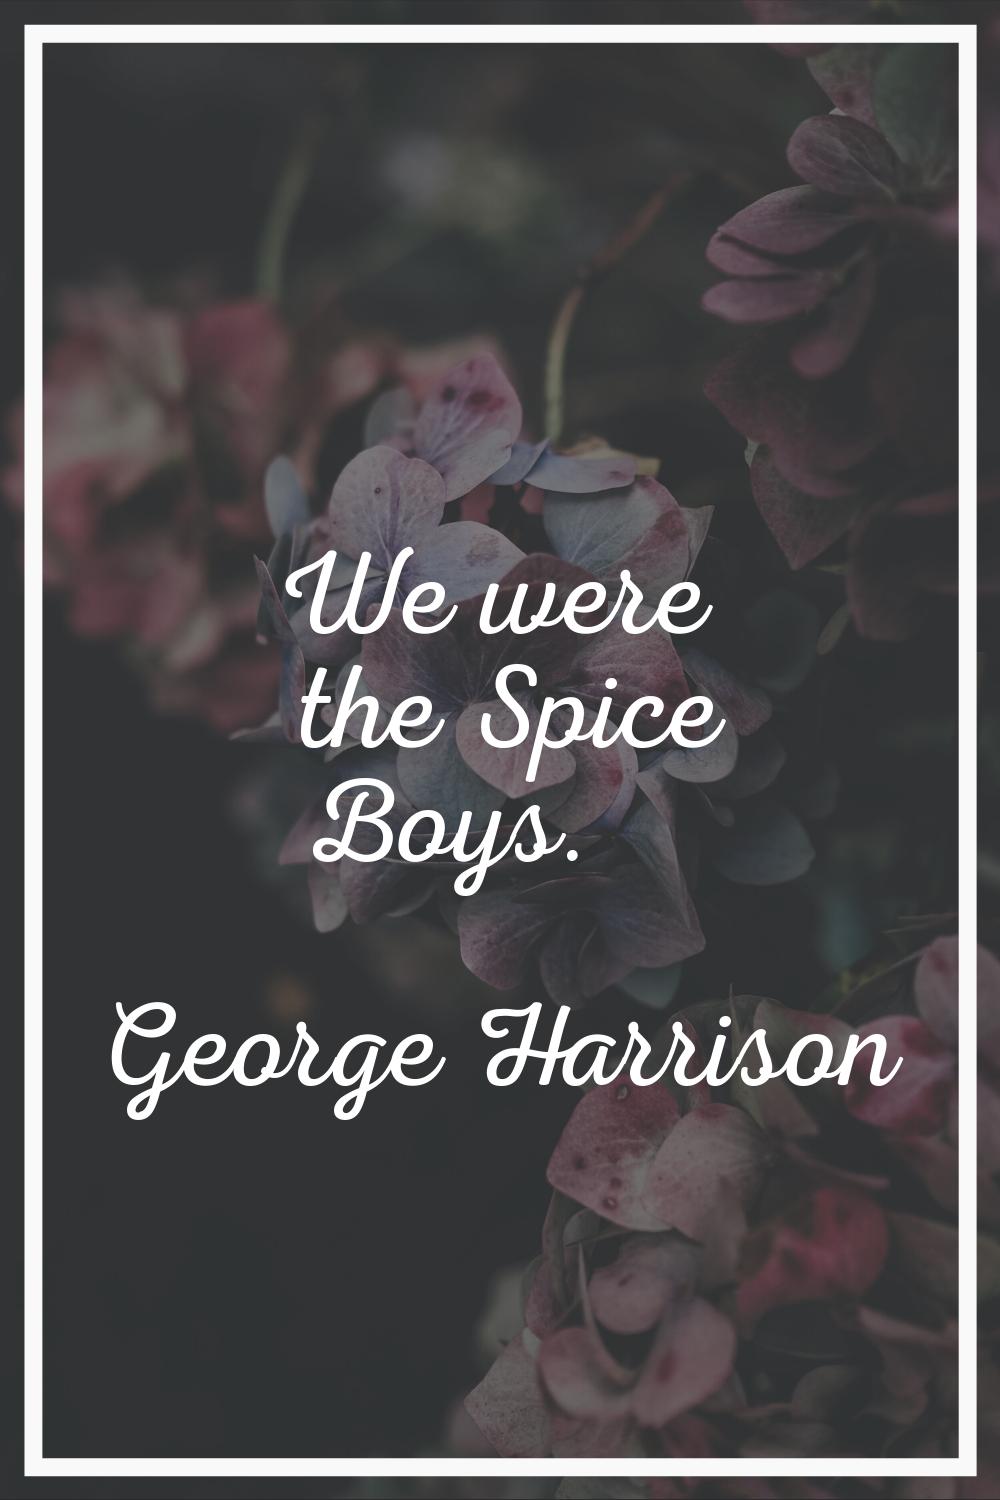 We were the Spice Boys.